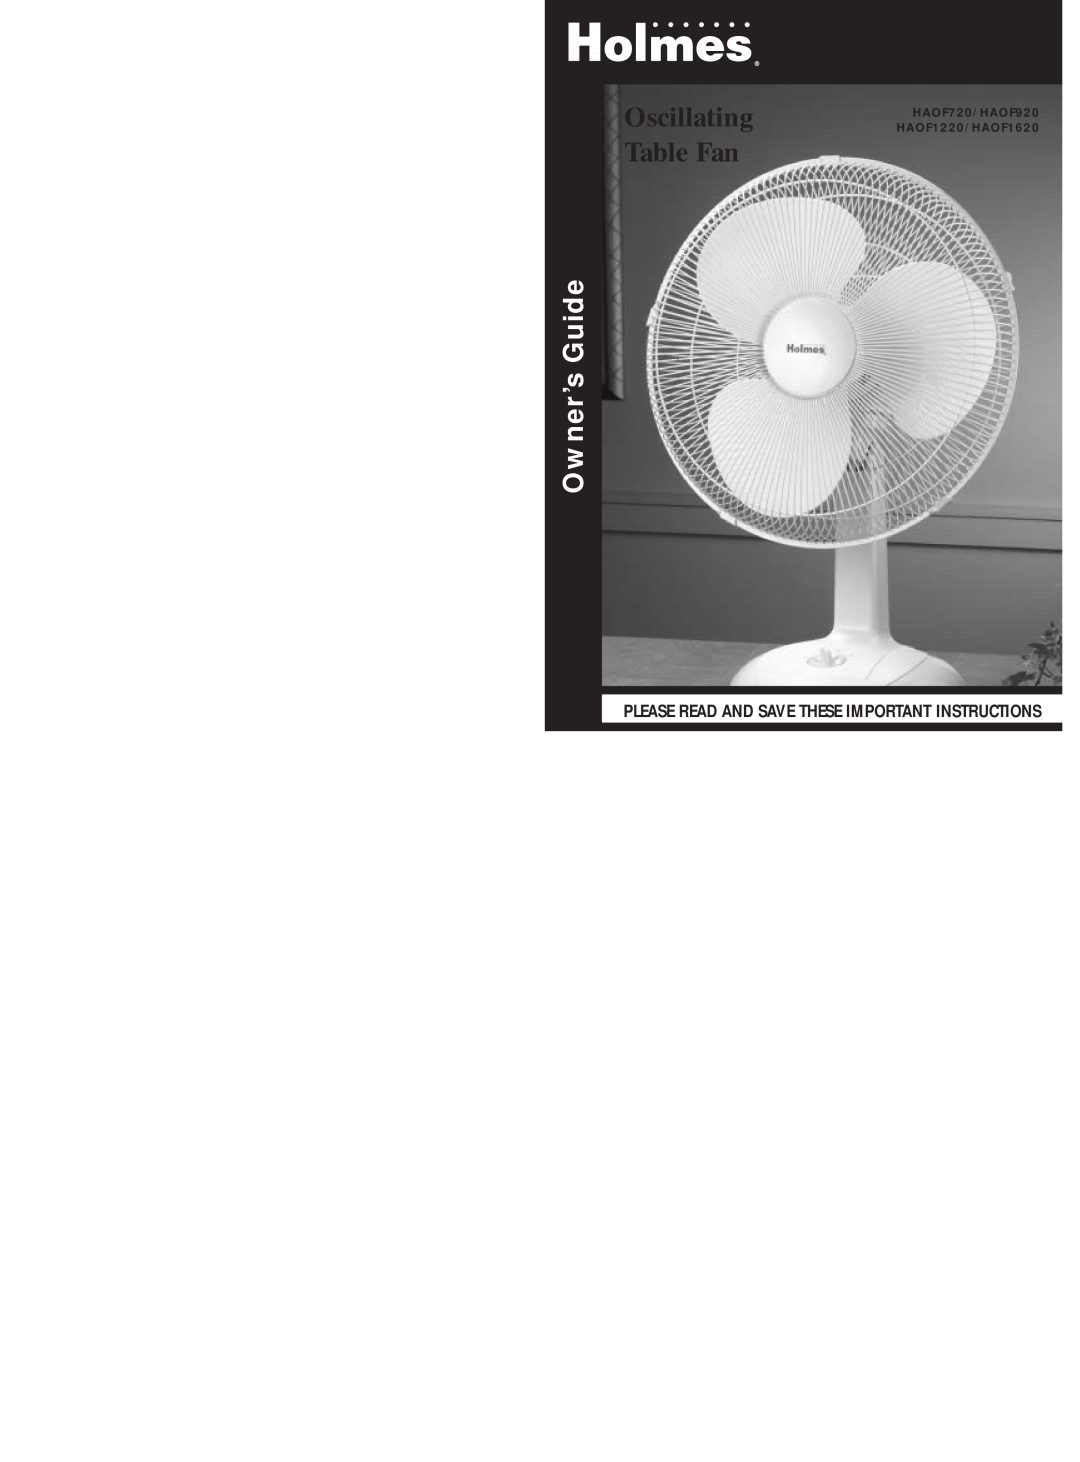 Holmes HAOF920, HAOF720 warranty Oscillating Table Fan, Owner’s Guide, Please Read And Save These Important Instructions 